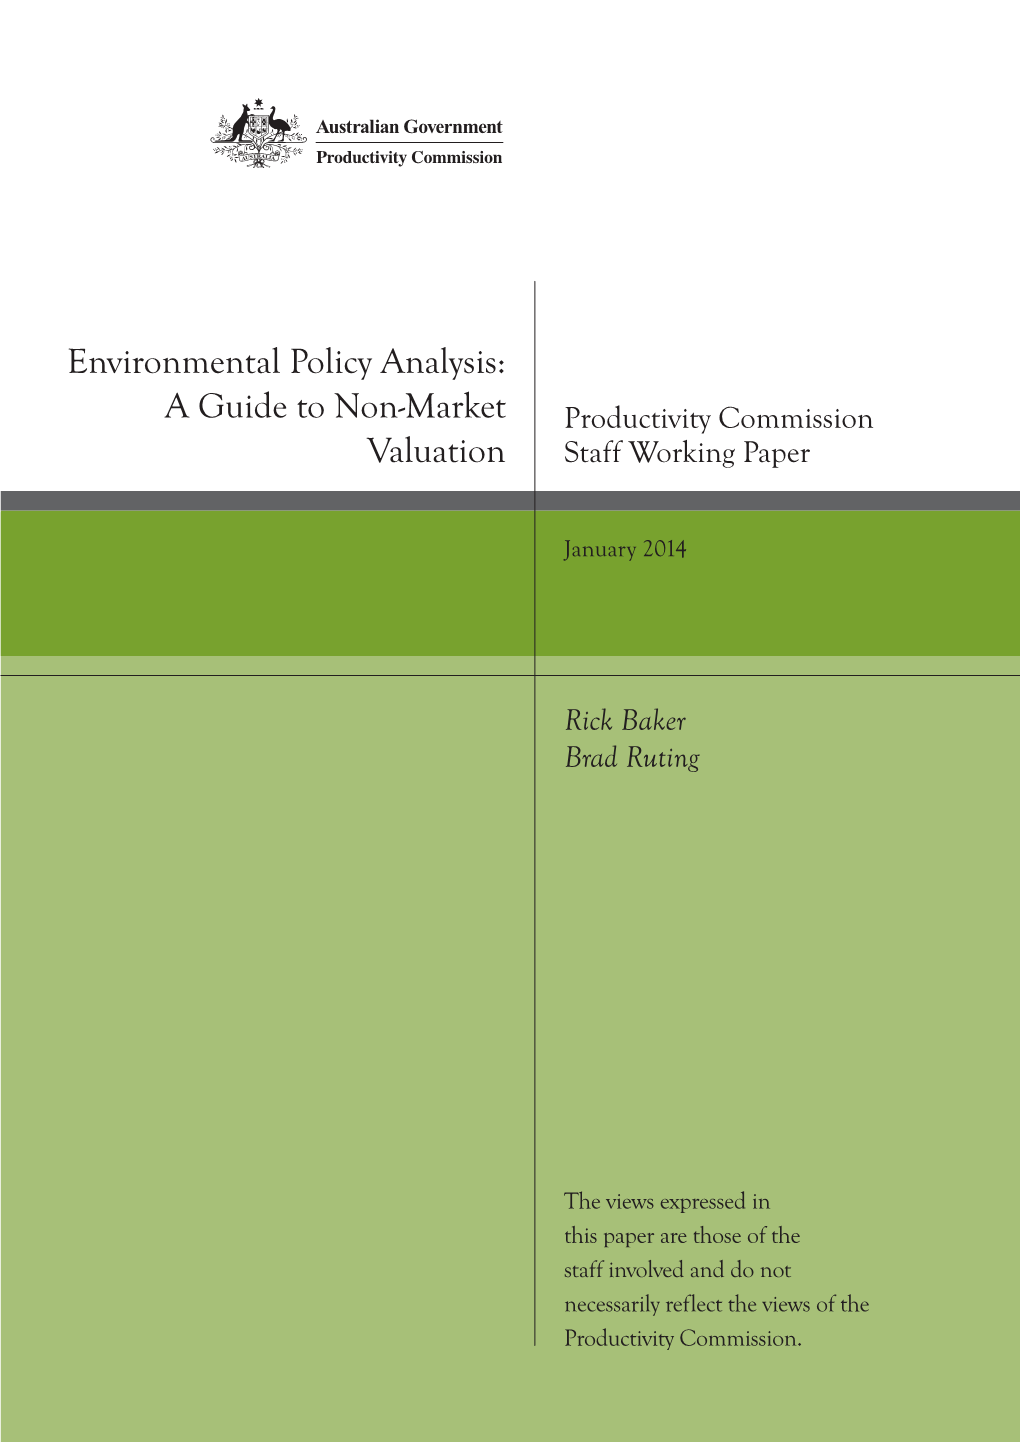 Environmental Policy Analysis: a Guide to Non-Market Valuation, Productivity Commission Staff Working Paper, Canberra